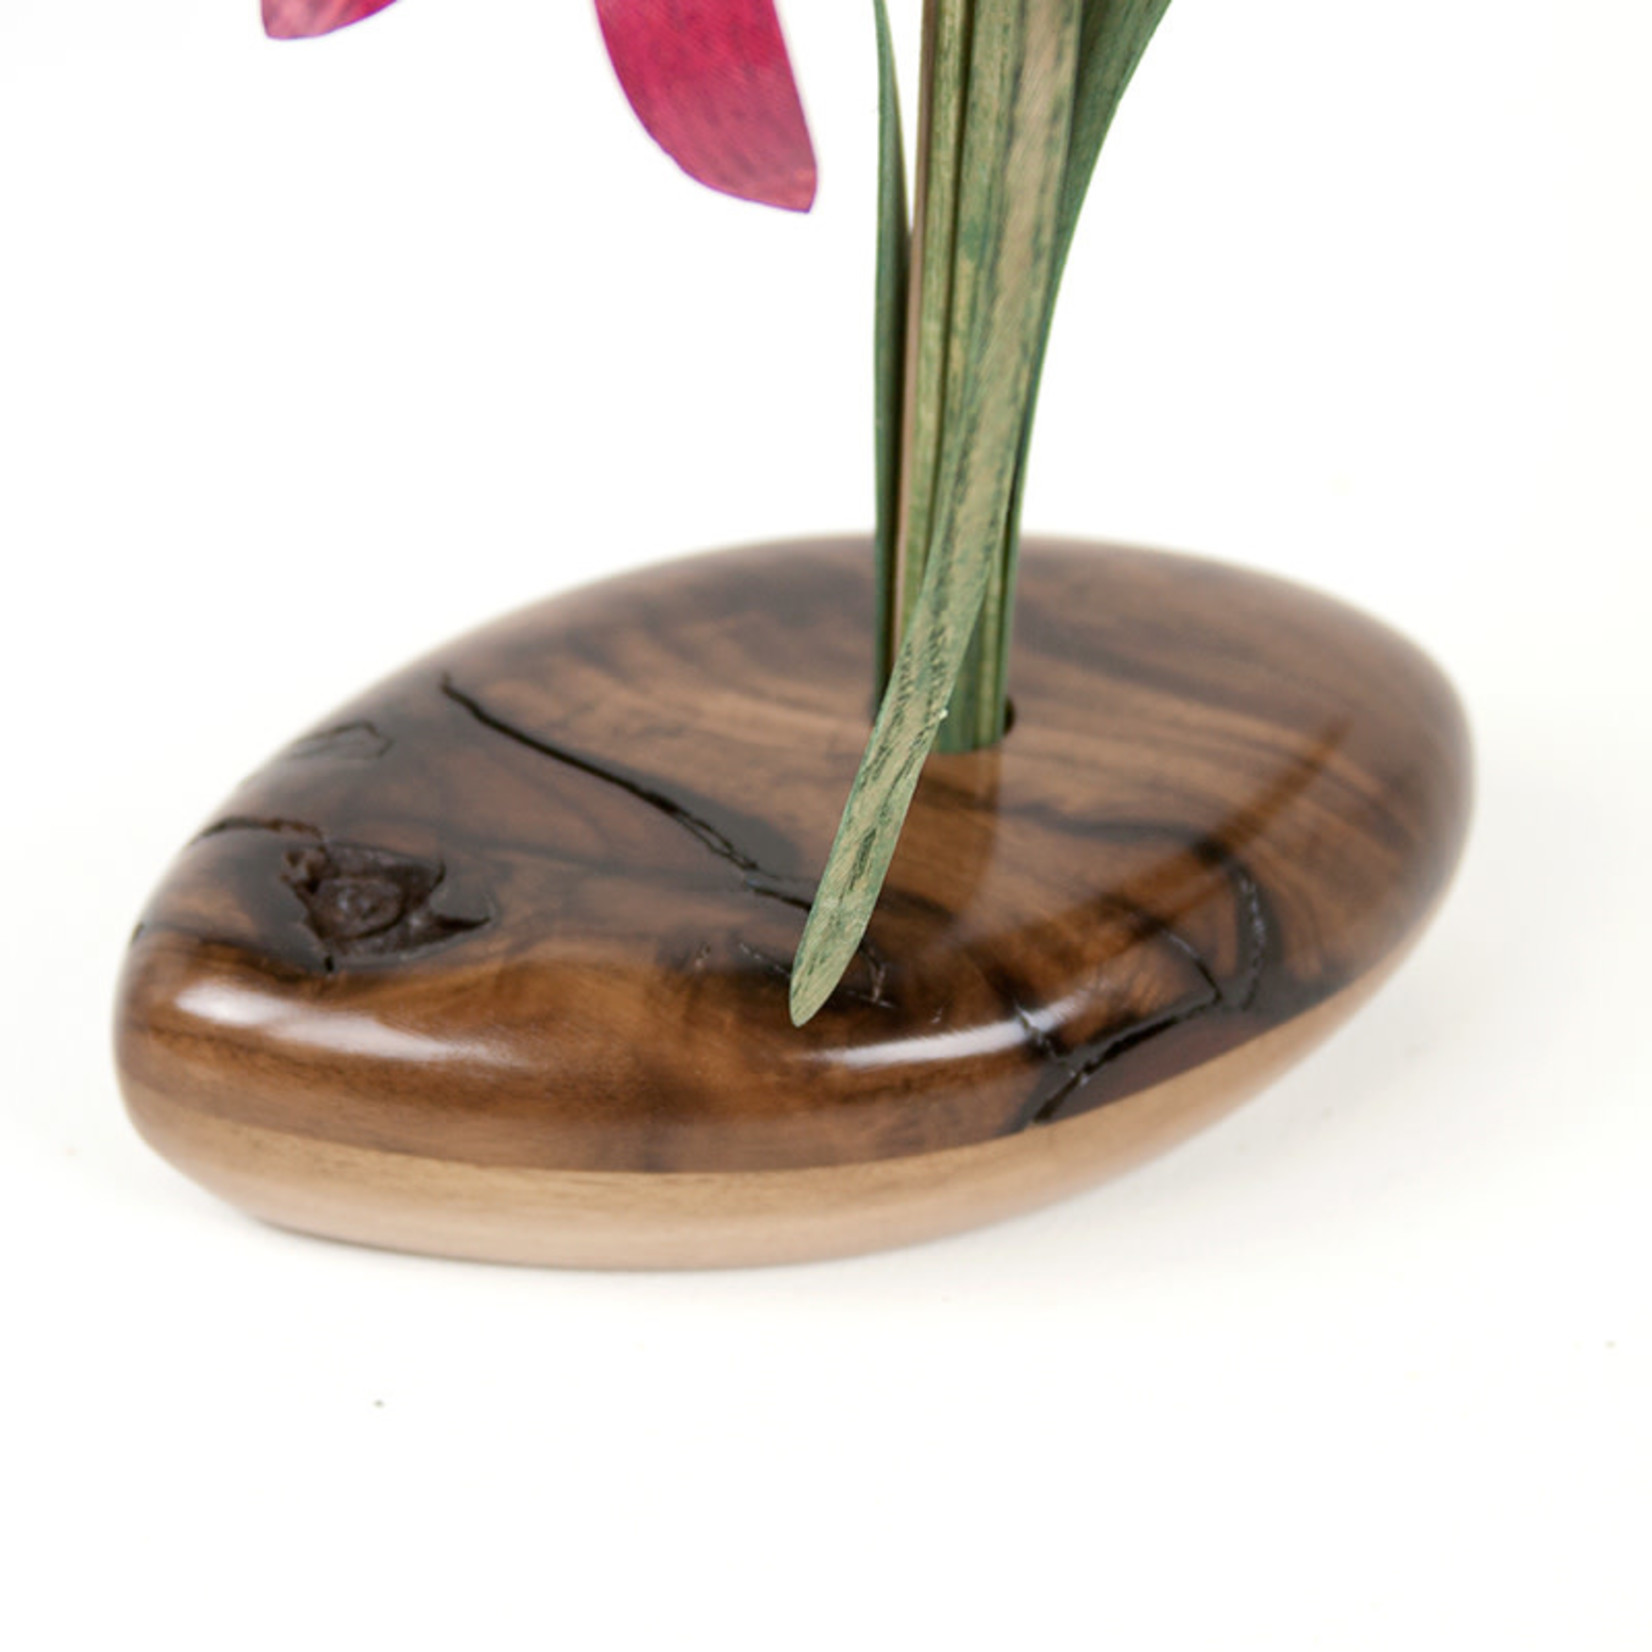 NATURE'S GIFT - WOOD VASE WITH WOOD FLOWERS